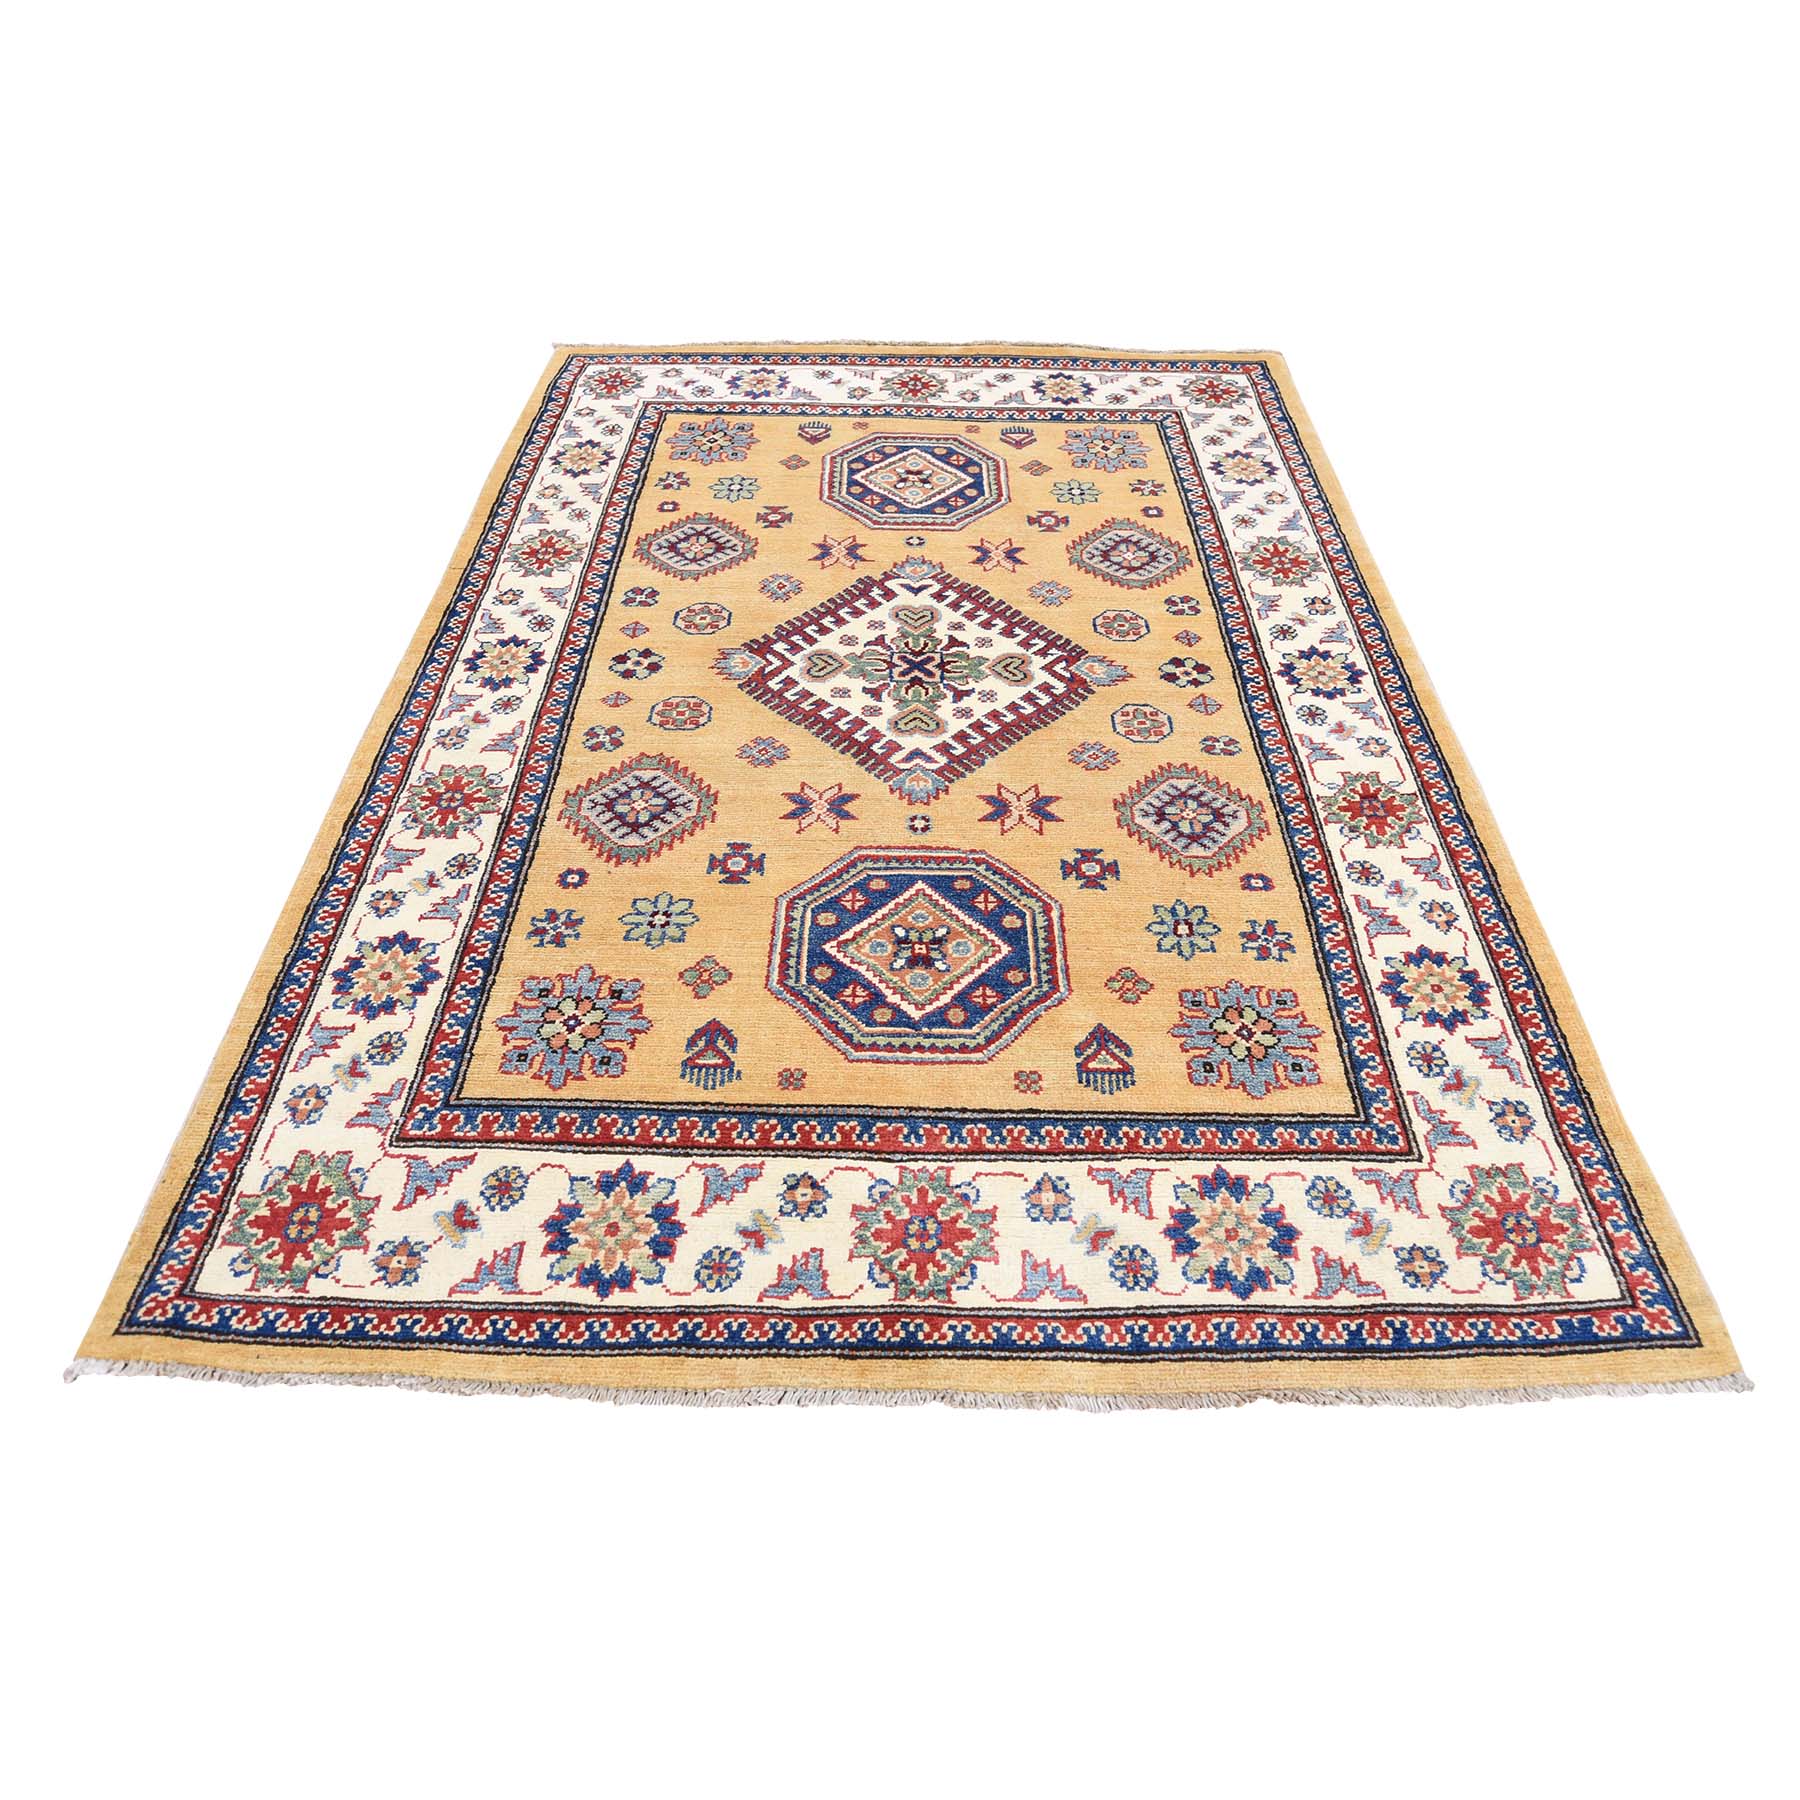 4-1--x6- Gold Special Kazak Tribal Design Hand-Knotted Oriental Rug 